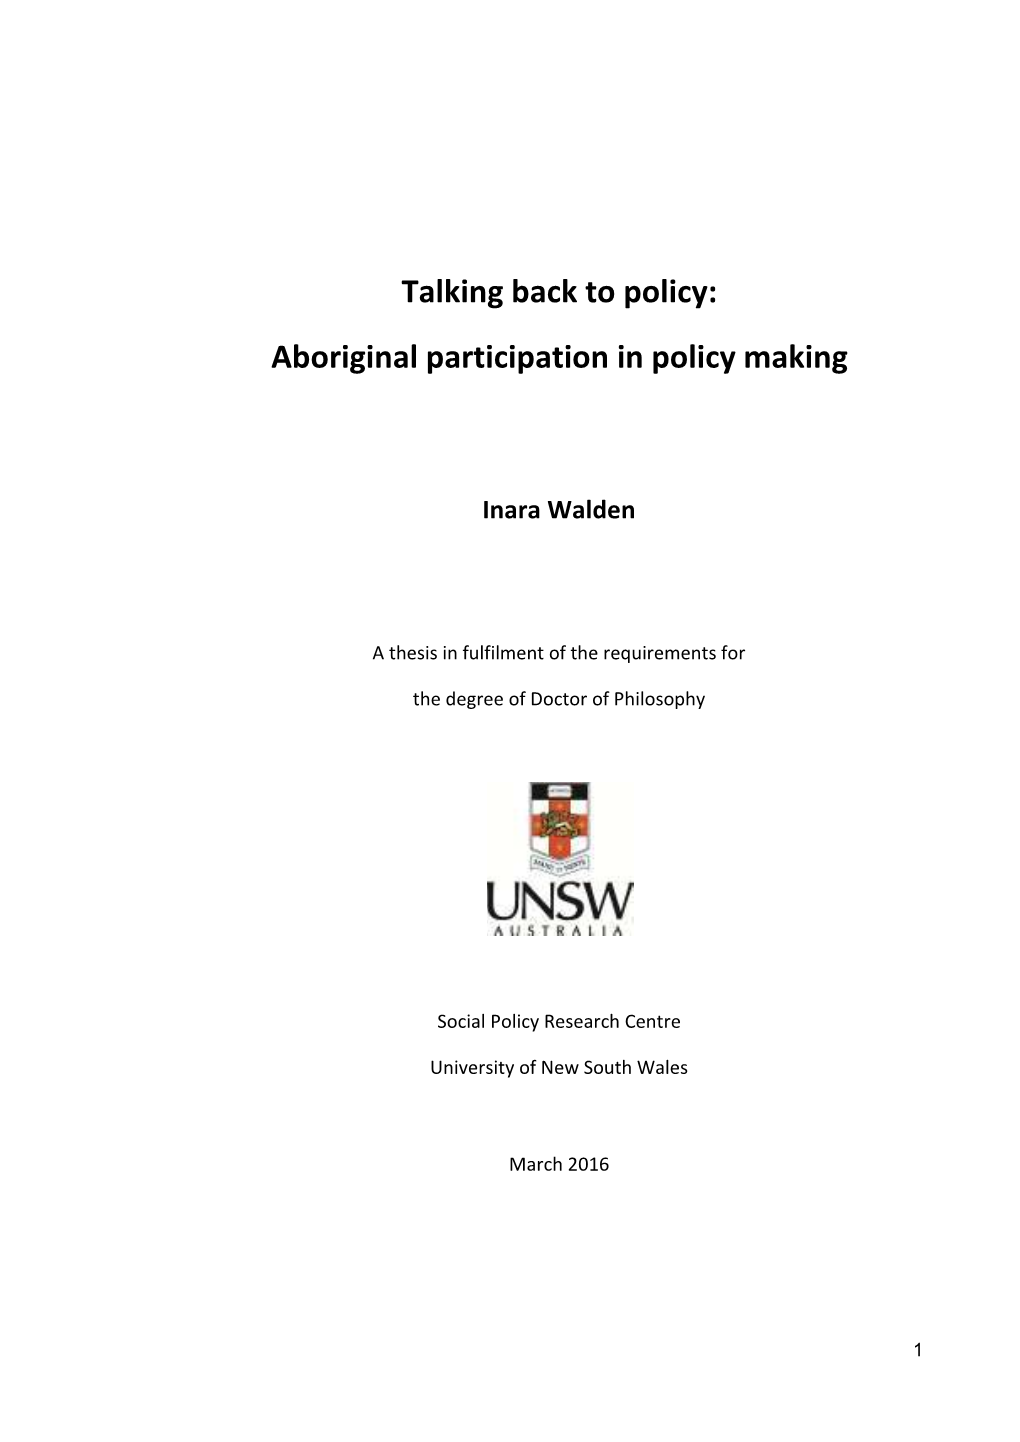 Talking Back to Policy: Aboriginal Participation in Policy Making